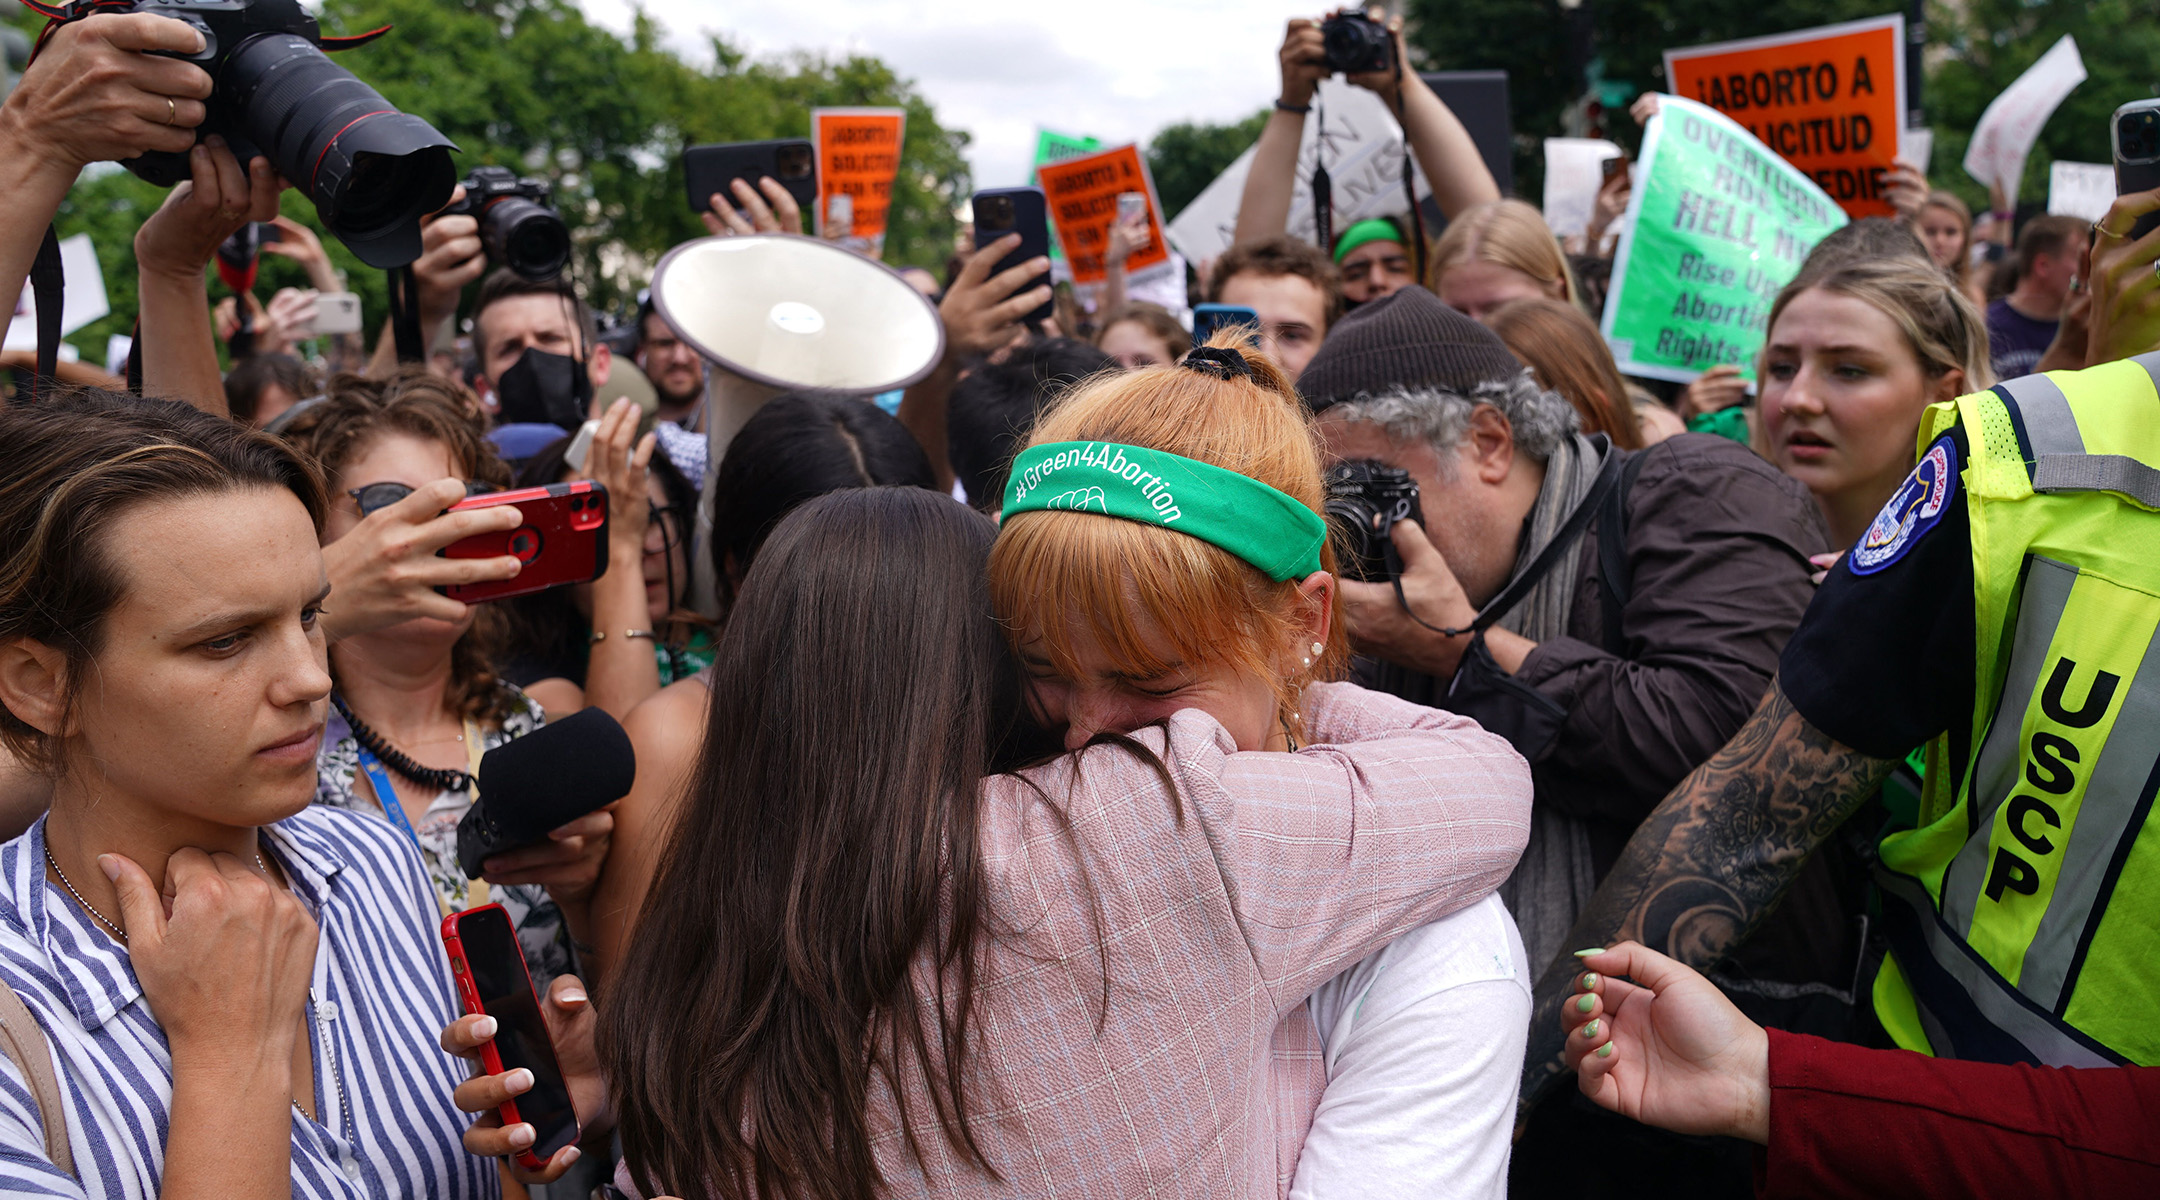 Abortion rights activists react outside the Supreme Court in Washington, D.C., Jun. 24, 2022. (Stefani Reynolds/AFP via Getty Images)